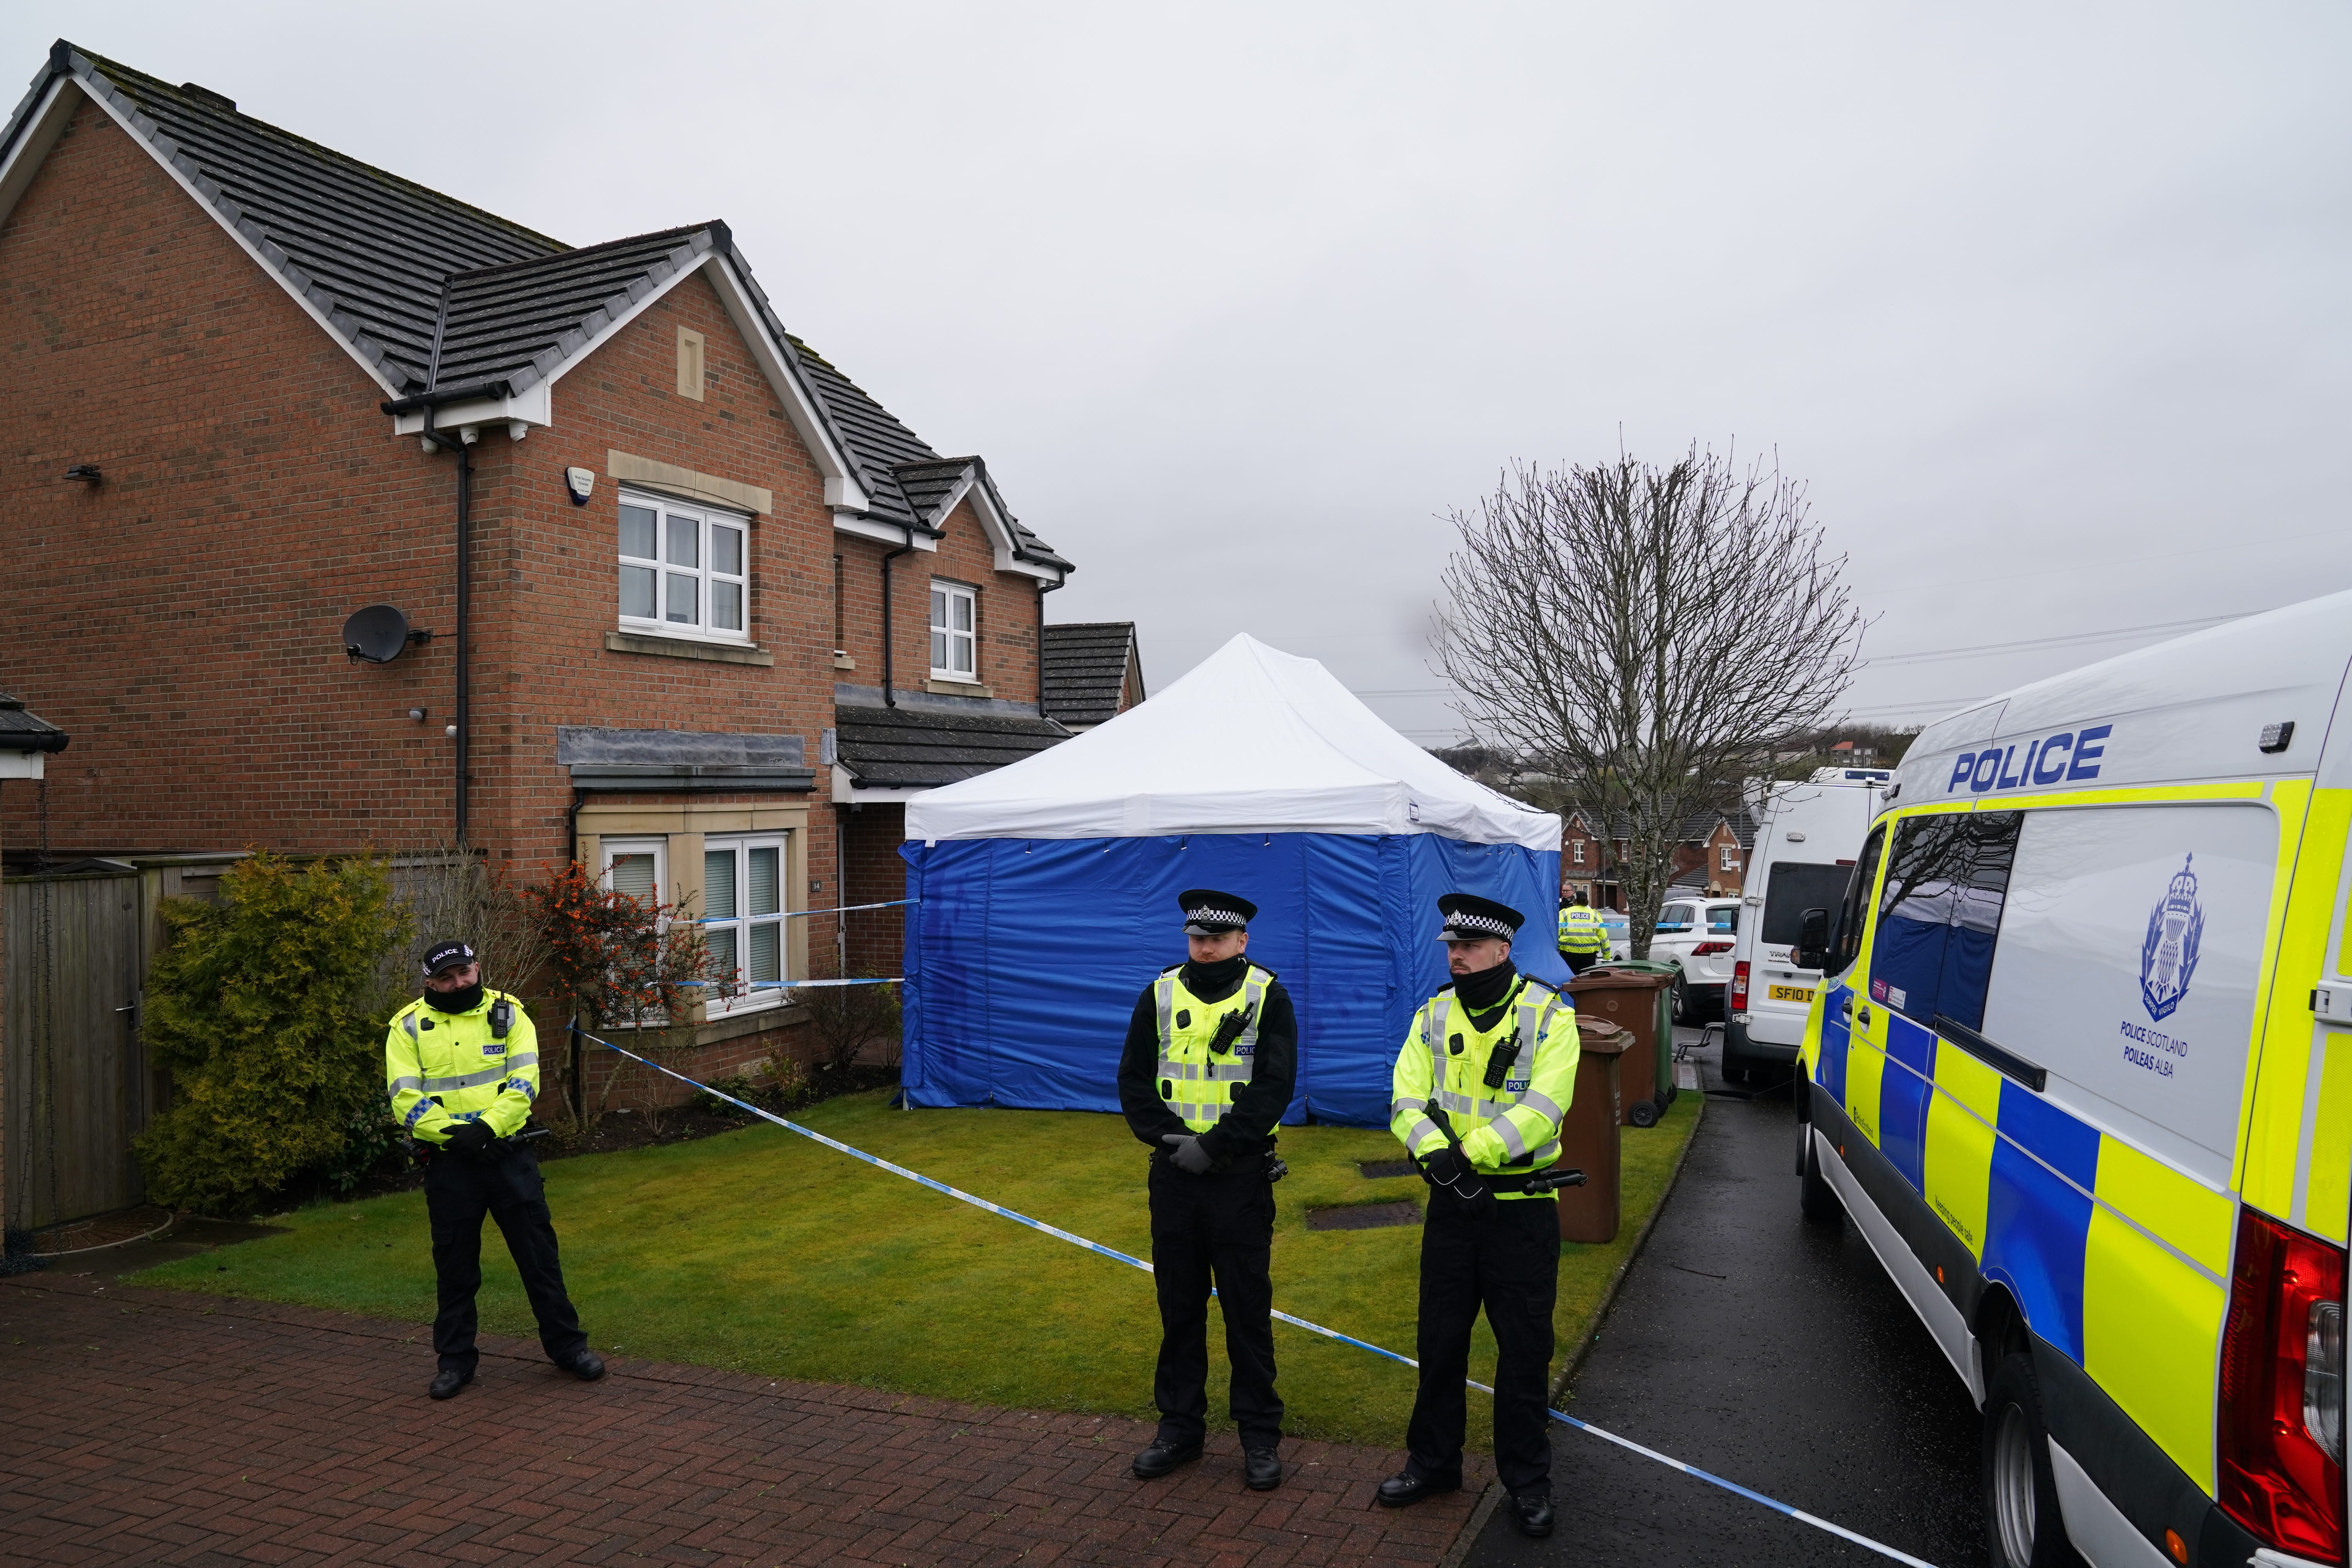 The home of Peter Murrell and Nicola Sturgeon has been raided